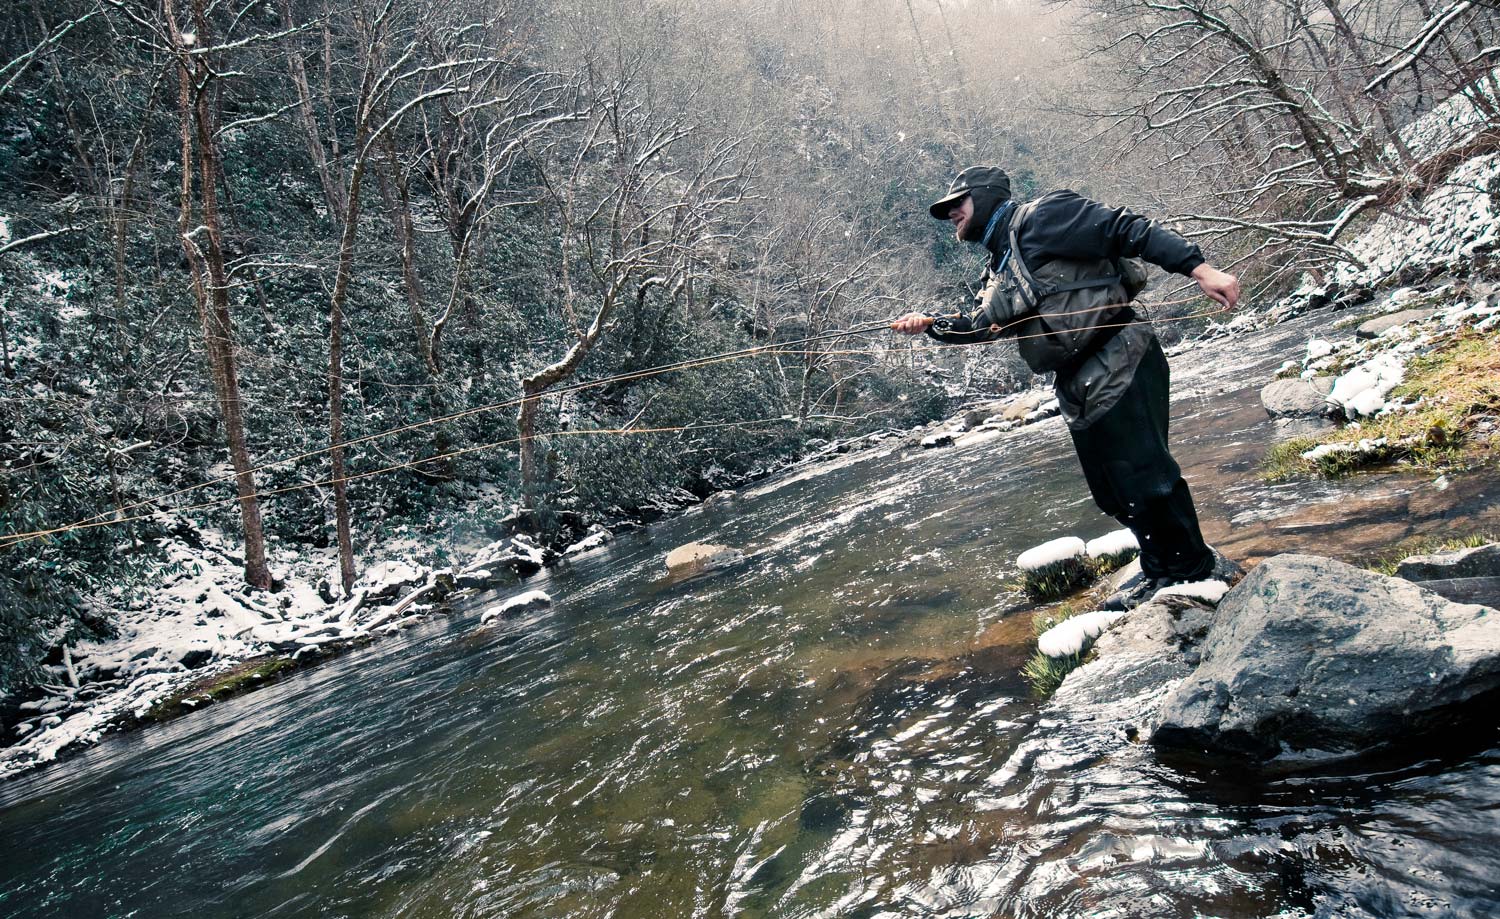 winter fly fishing gear - Fly Fishing, Gink and Gasoline